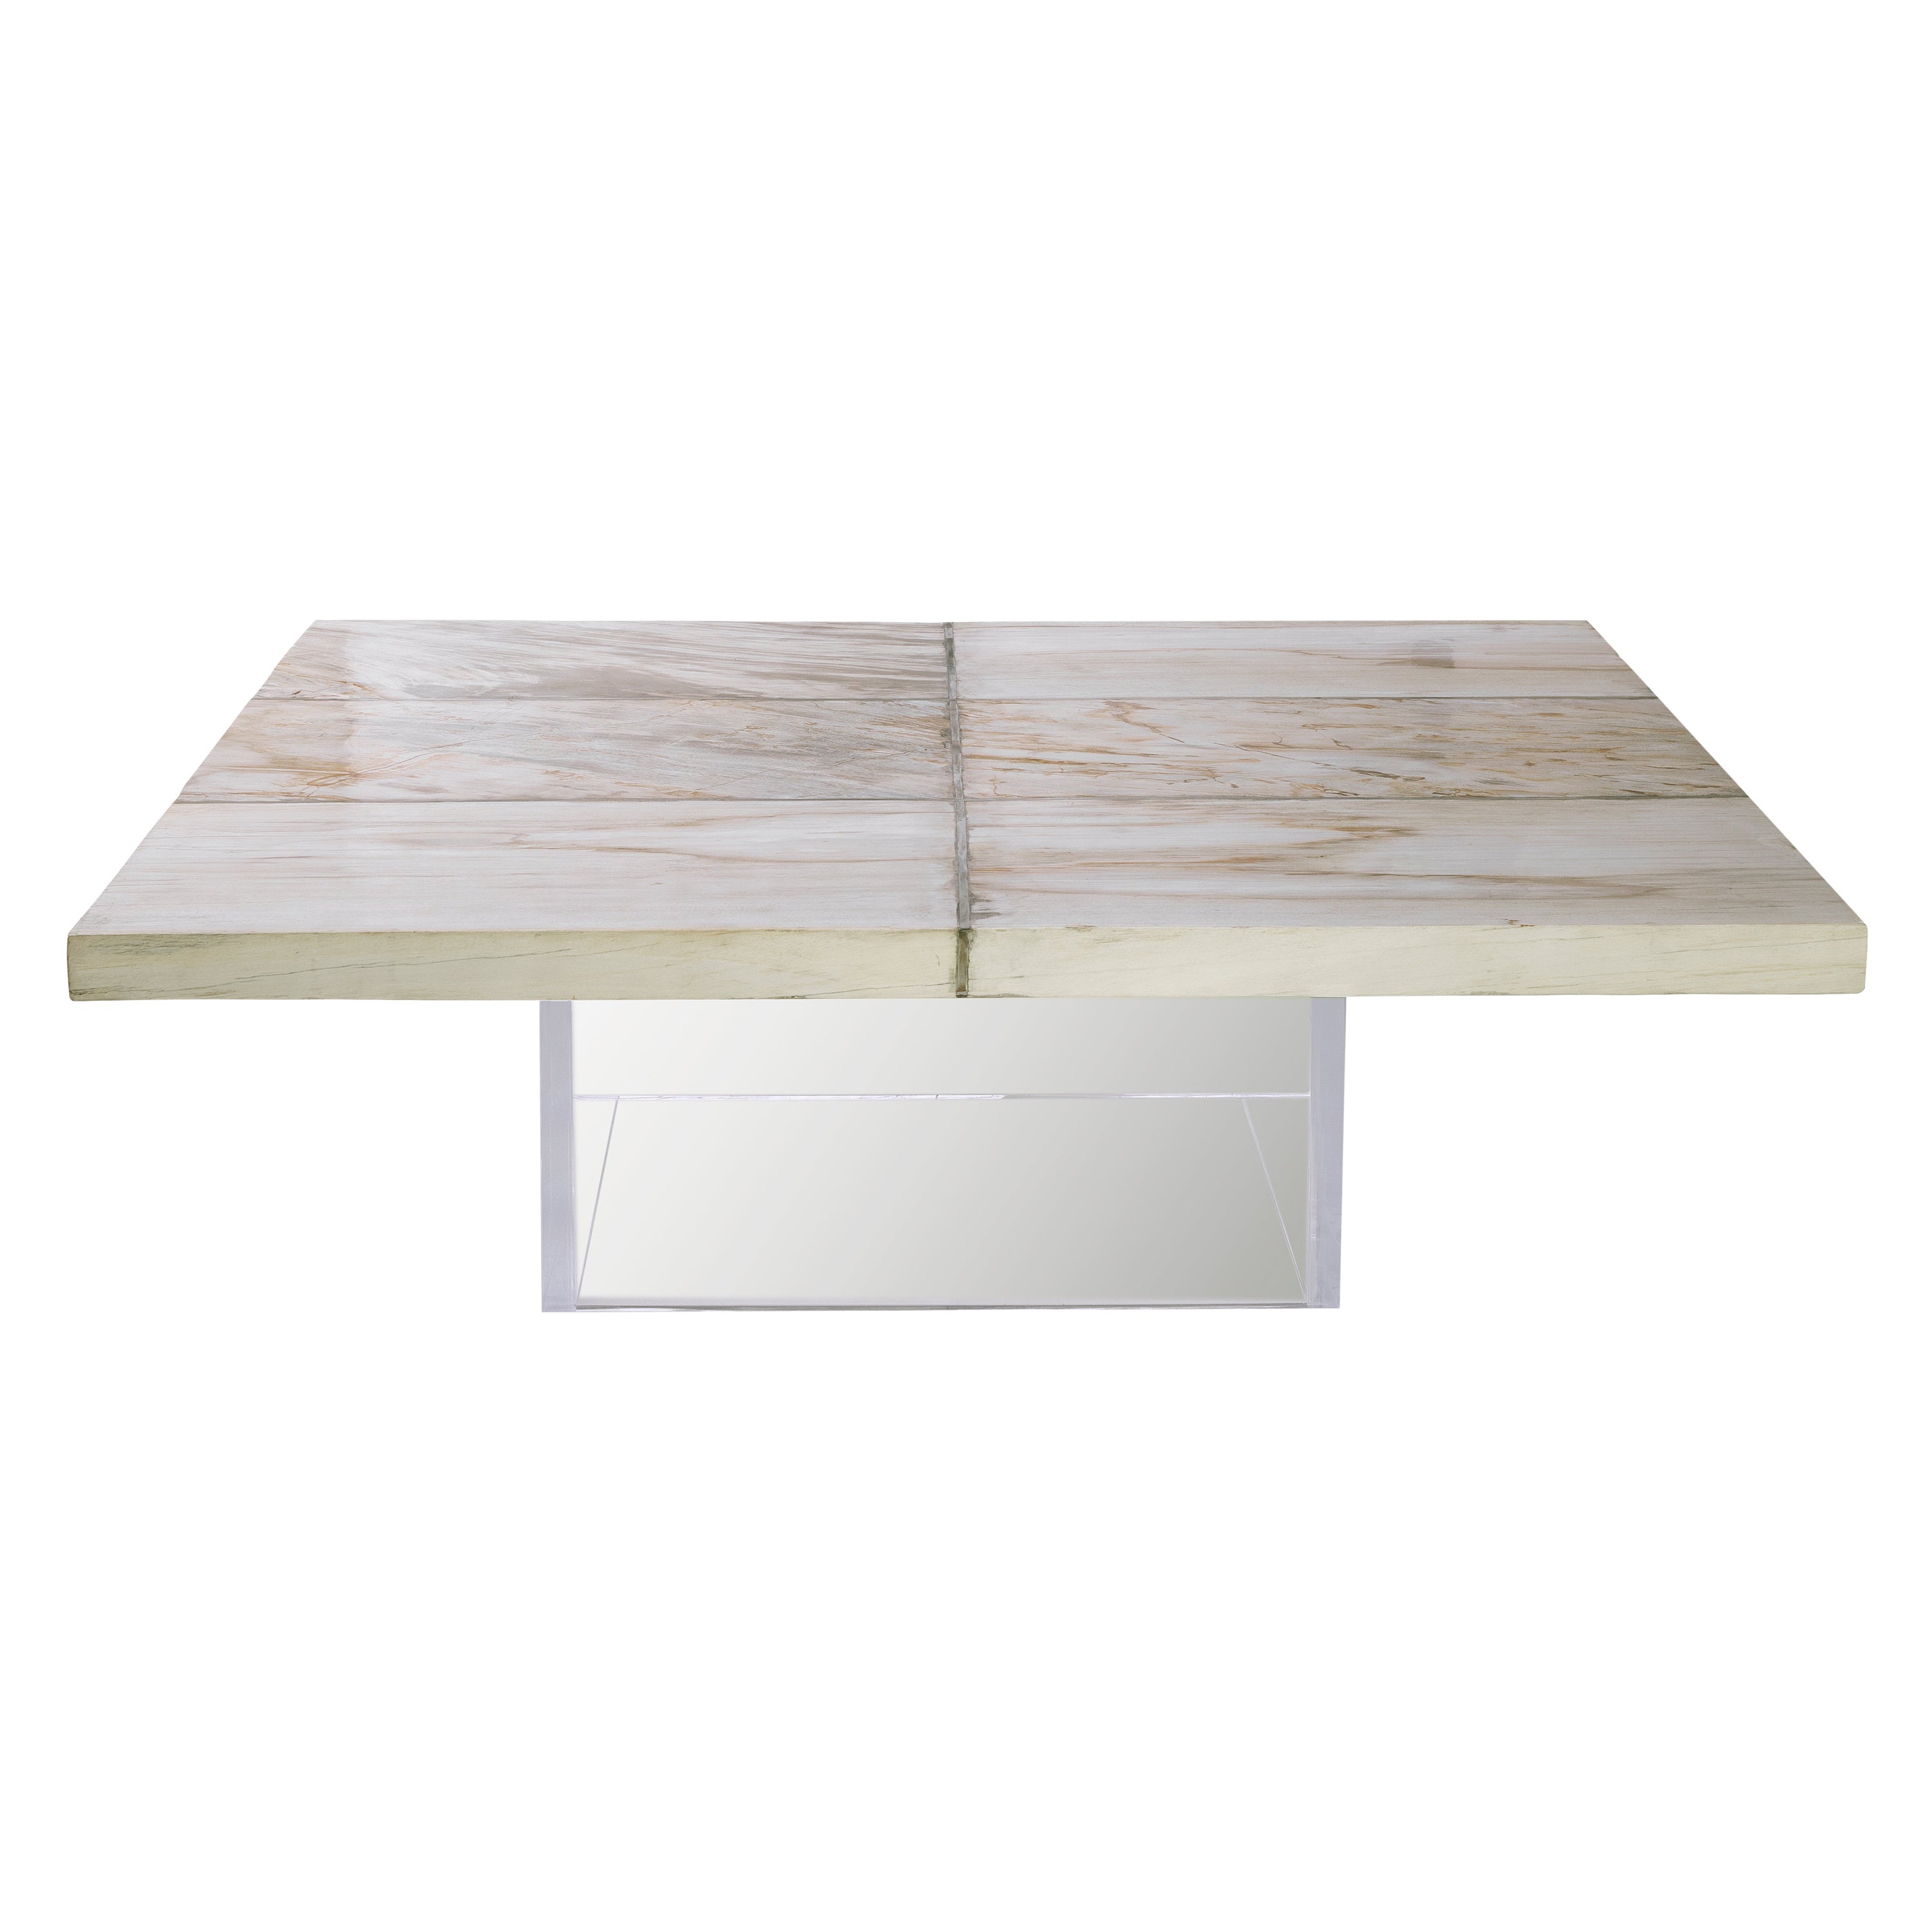 Square Acrylic and Wooden Coffee Table, Petra Coffee Table For Sale